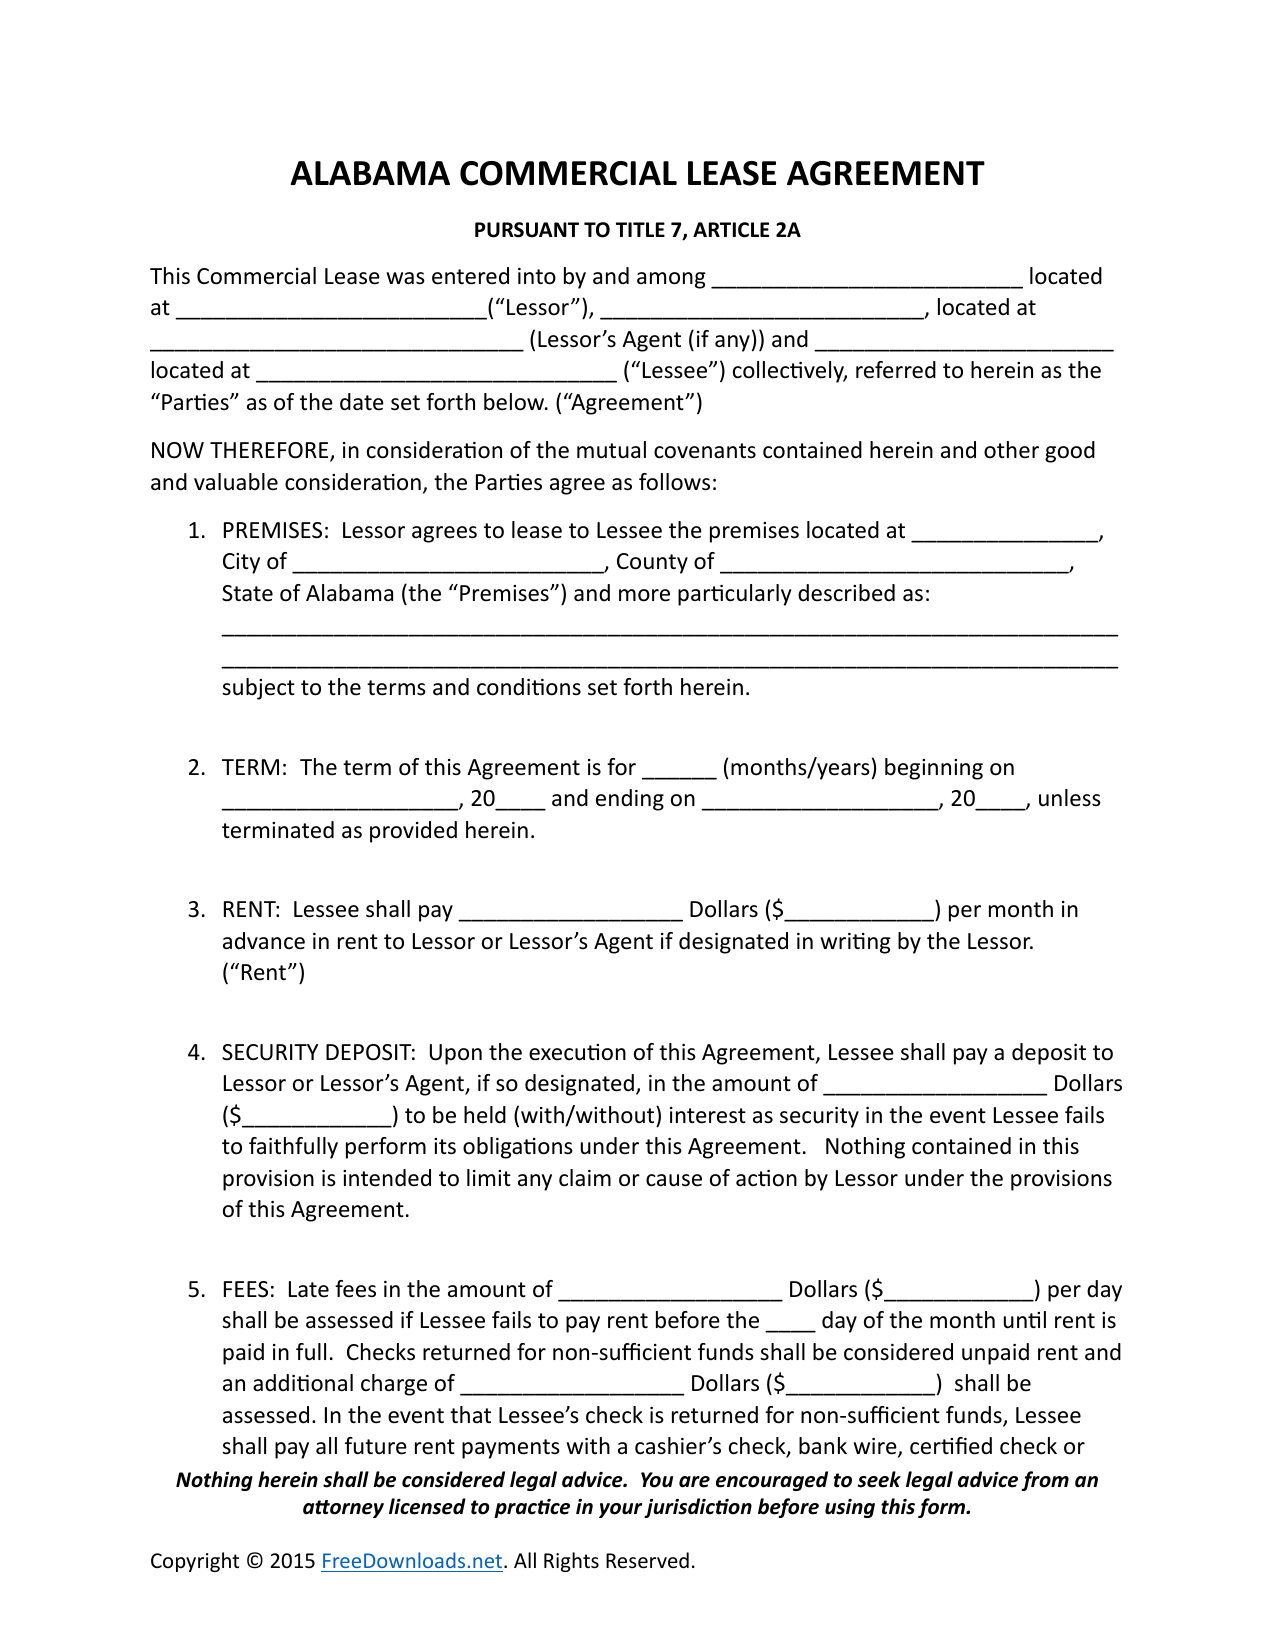 download alabama commercial lease agreement template pdf rtf word freedownloads net